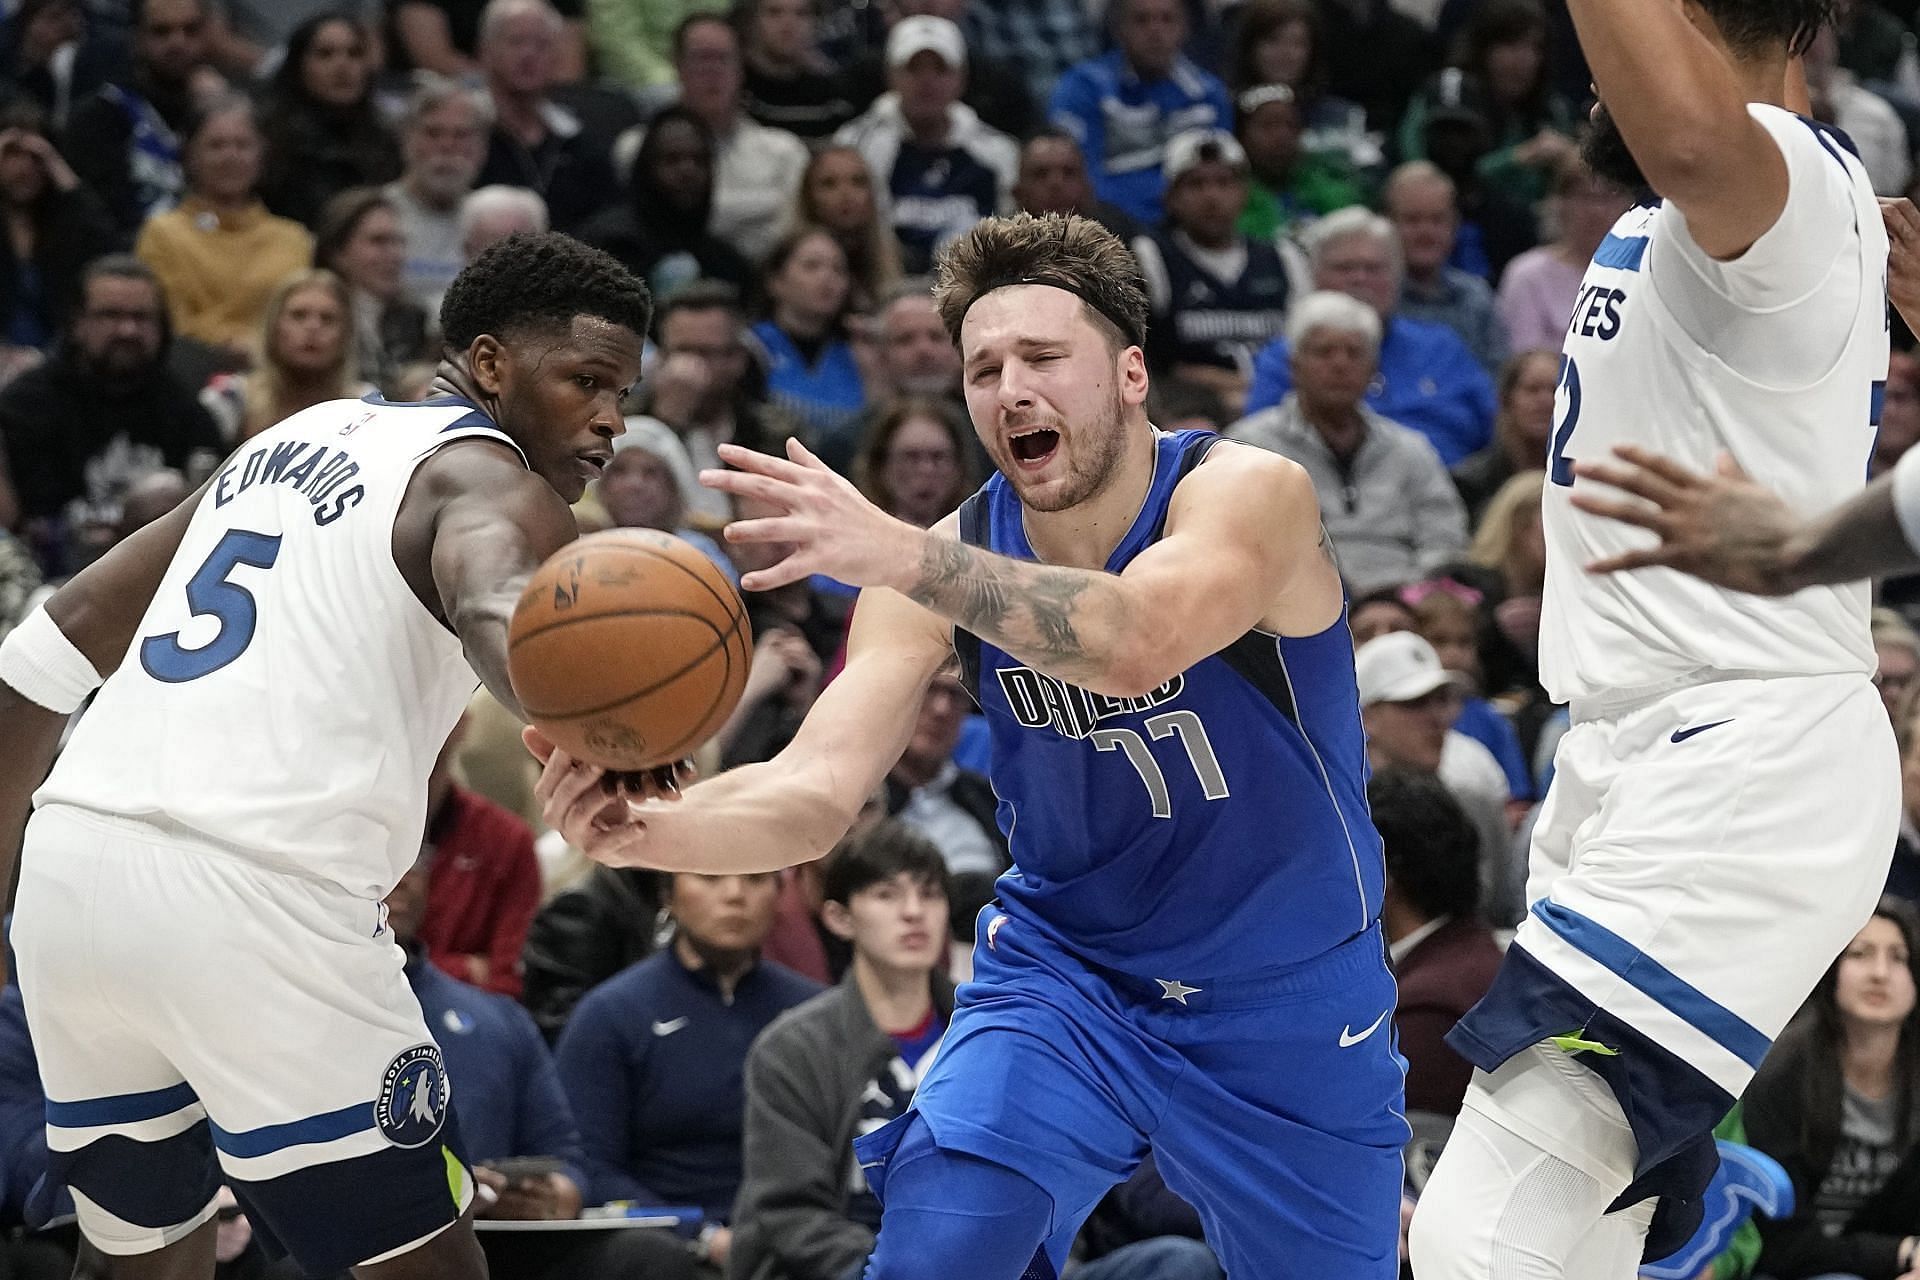 Dallas Mavericks vs Minnesota Timberwolves: Game details, preview, betting tips, predictions and more